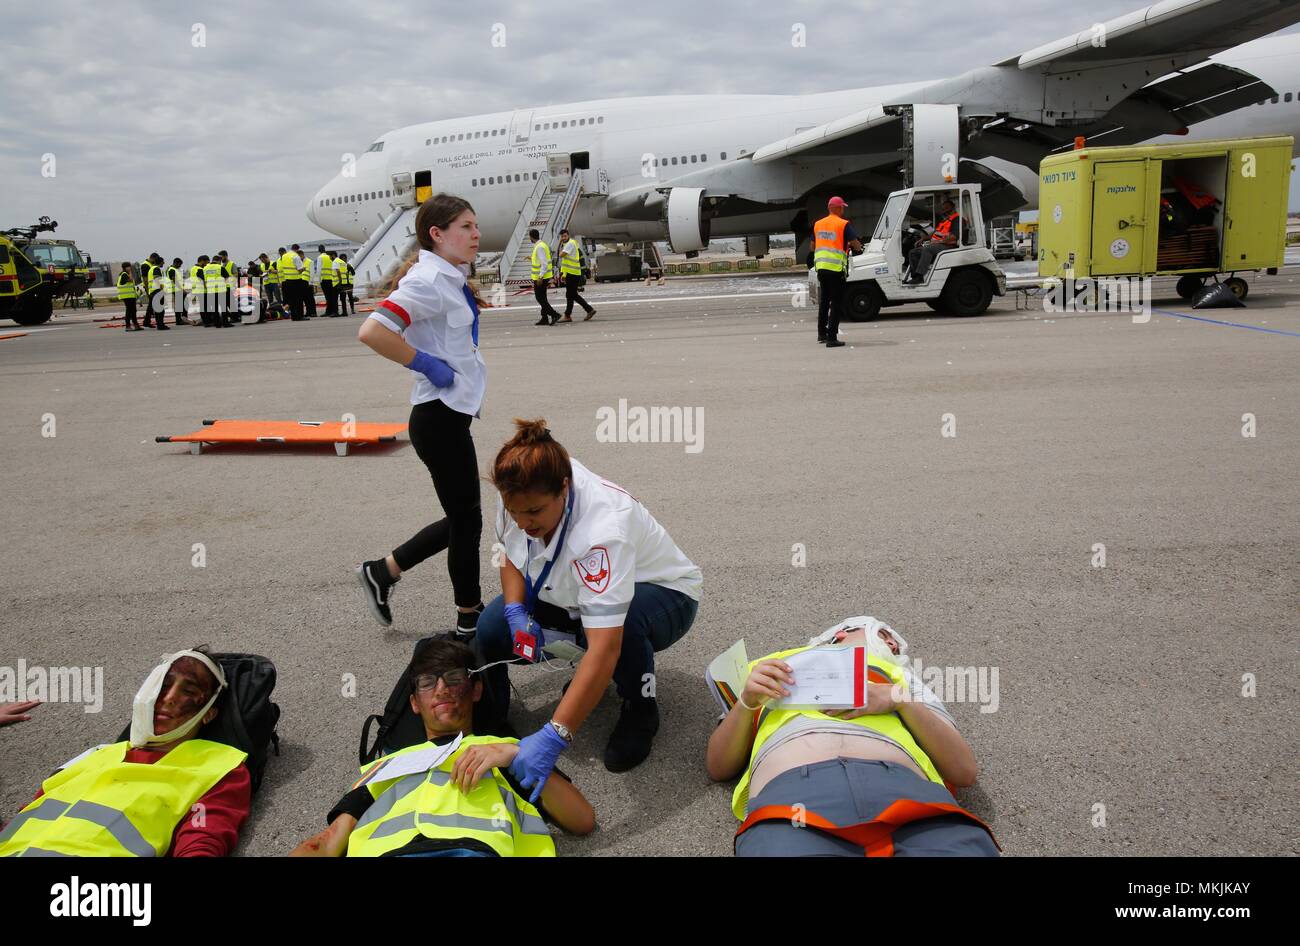 Tel Aviv, Israel. 8th May, 2018. People take part in the 'Pelican' emergency drill at Ben Gurion International Airport near Tel Aviv, Israel, on May 8, 2018. Ben Gurion International Airport carried out on Tuesday a large scale emergency drill simulating an emergency landing by a Boeing 747-400 jumbo jet carrying hundreds of passengers. Around 1,000 representatives of the airport, the defense and health ministries, the air force, police, emergency services and the IDF Home Front Command took part in the drill. Credit: Gil Cohen Magen/Xinhua/Alamy Live News Stock Photo